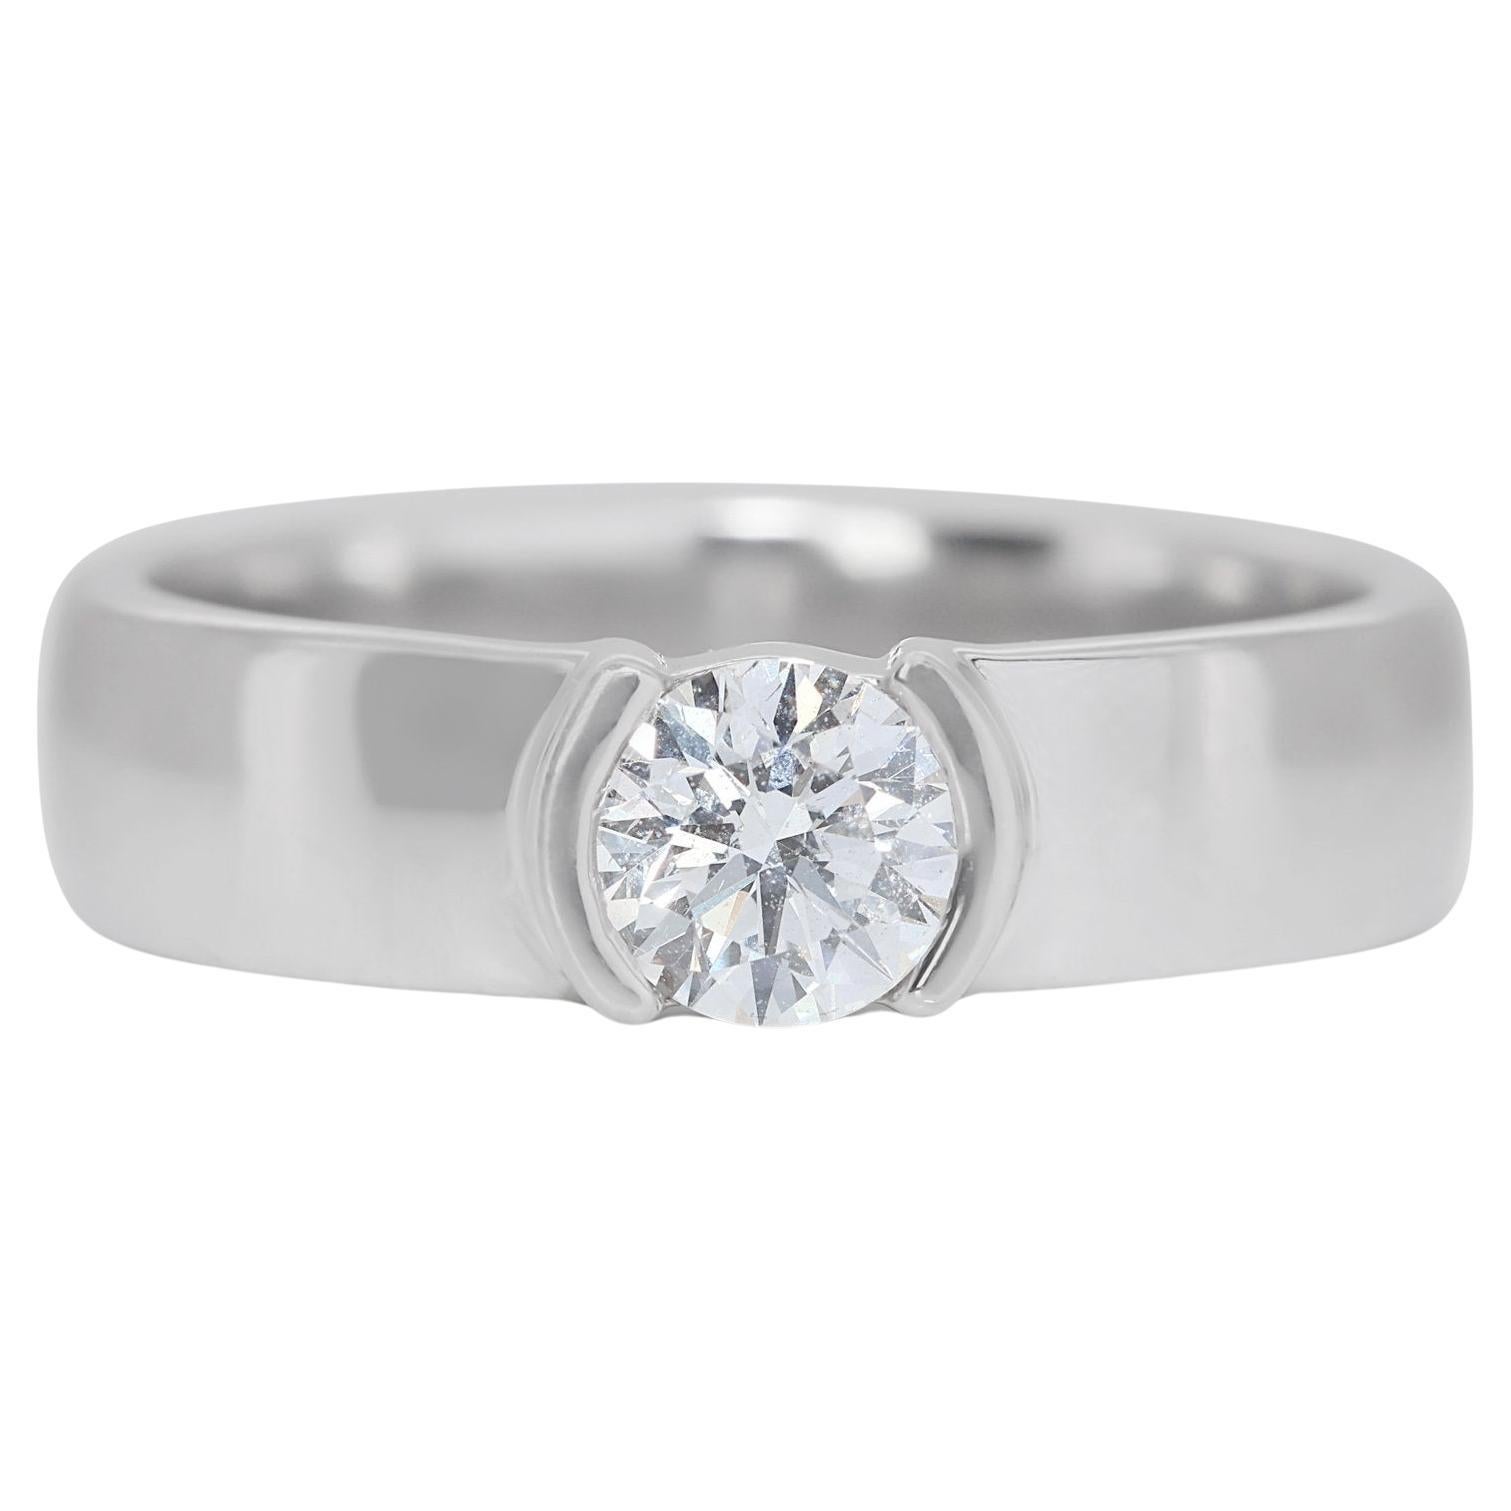 Sophisticated 0.70ct Diamond Solitaire Ring in 18k White Gold - GIA Certified